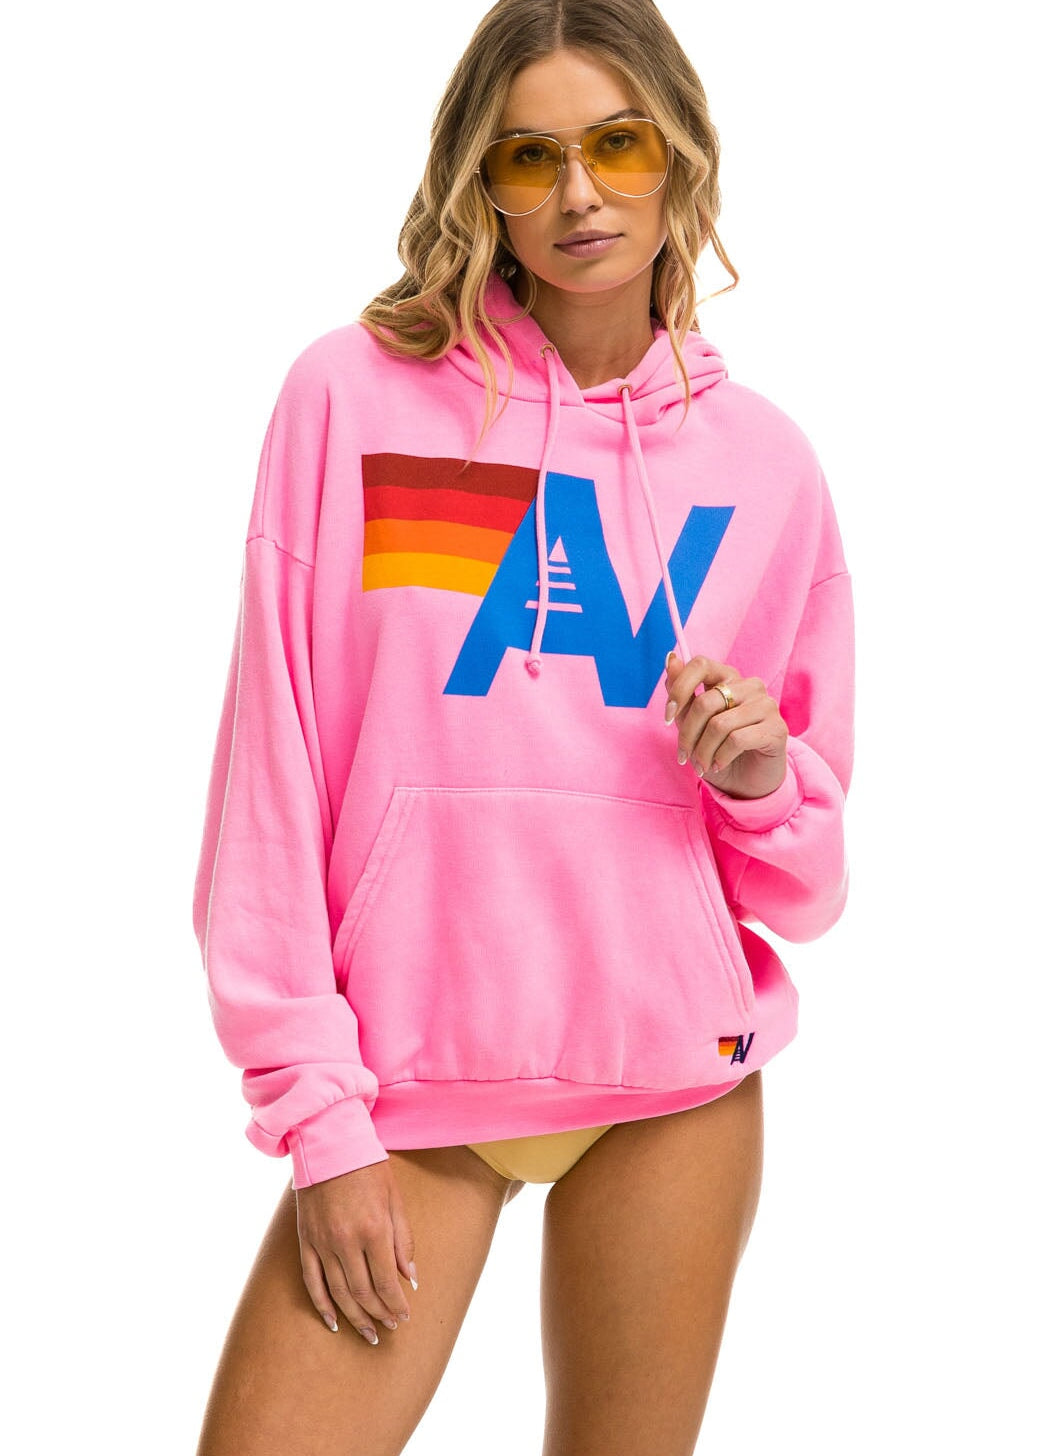 logo-pullover-relaxed-hoodie-neon-pink-hoodie-aviator-nation-238143_3000x_42cfc22a-e152-4966-b2ee-7d56166d90be.jpg